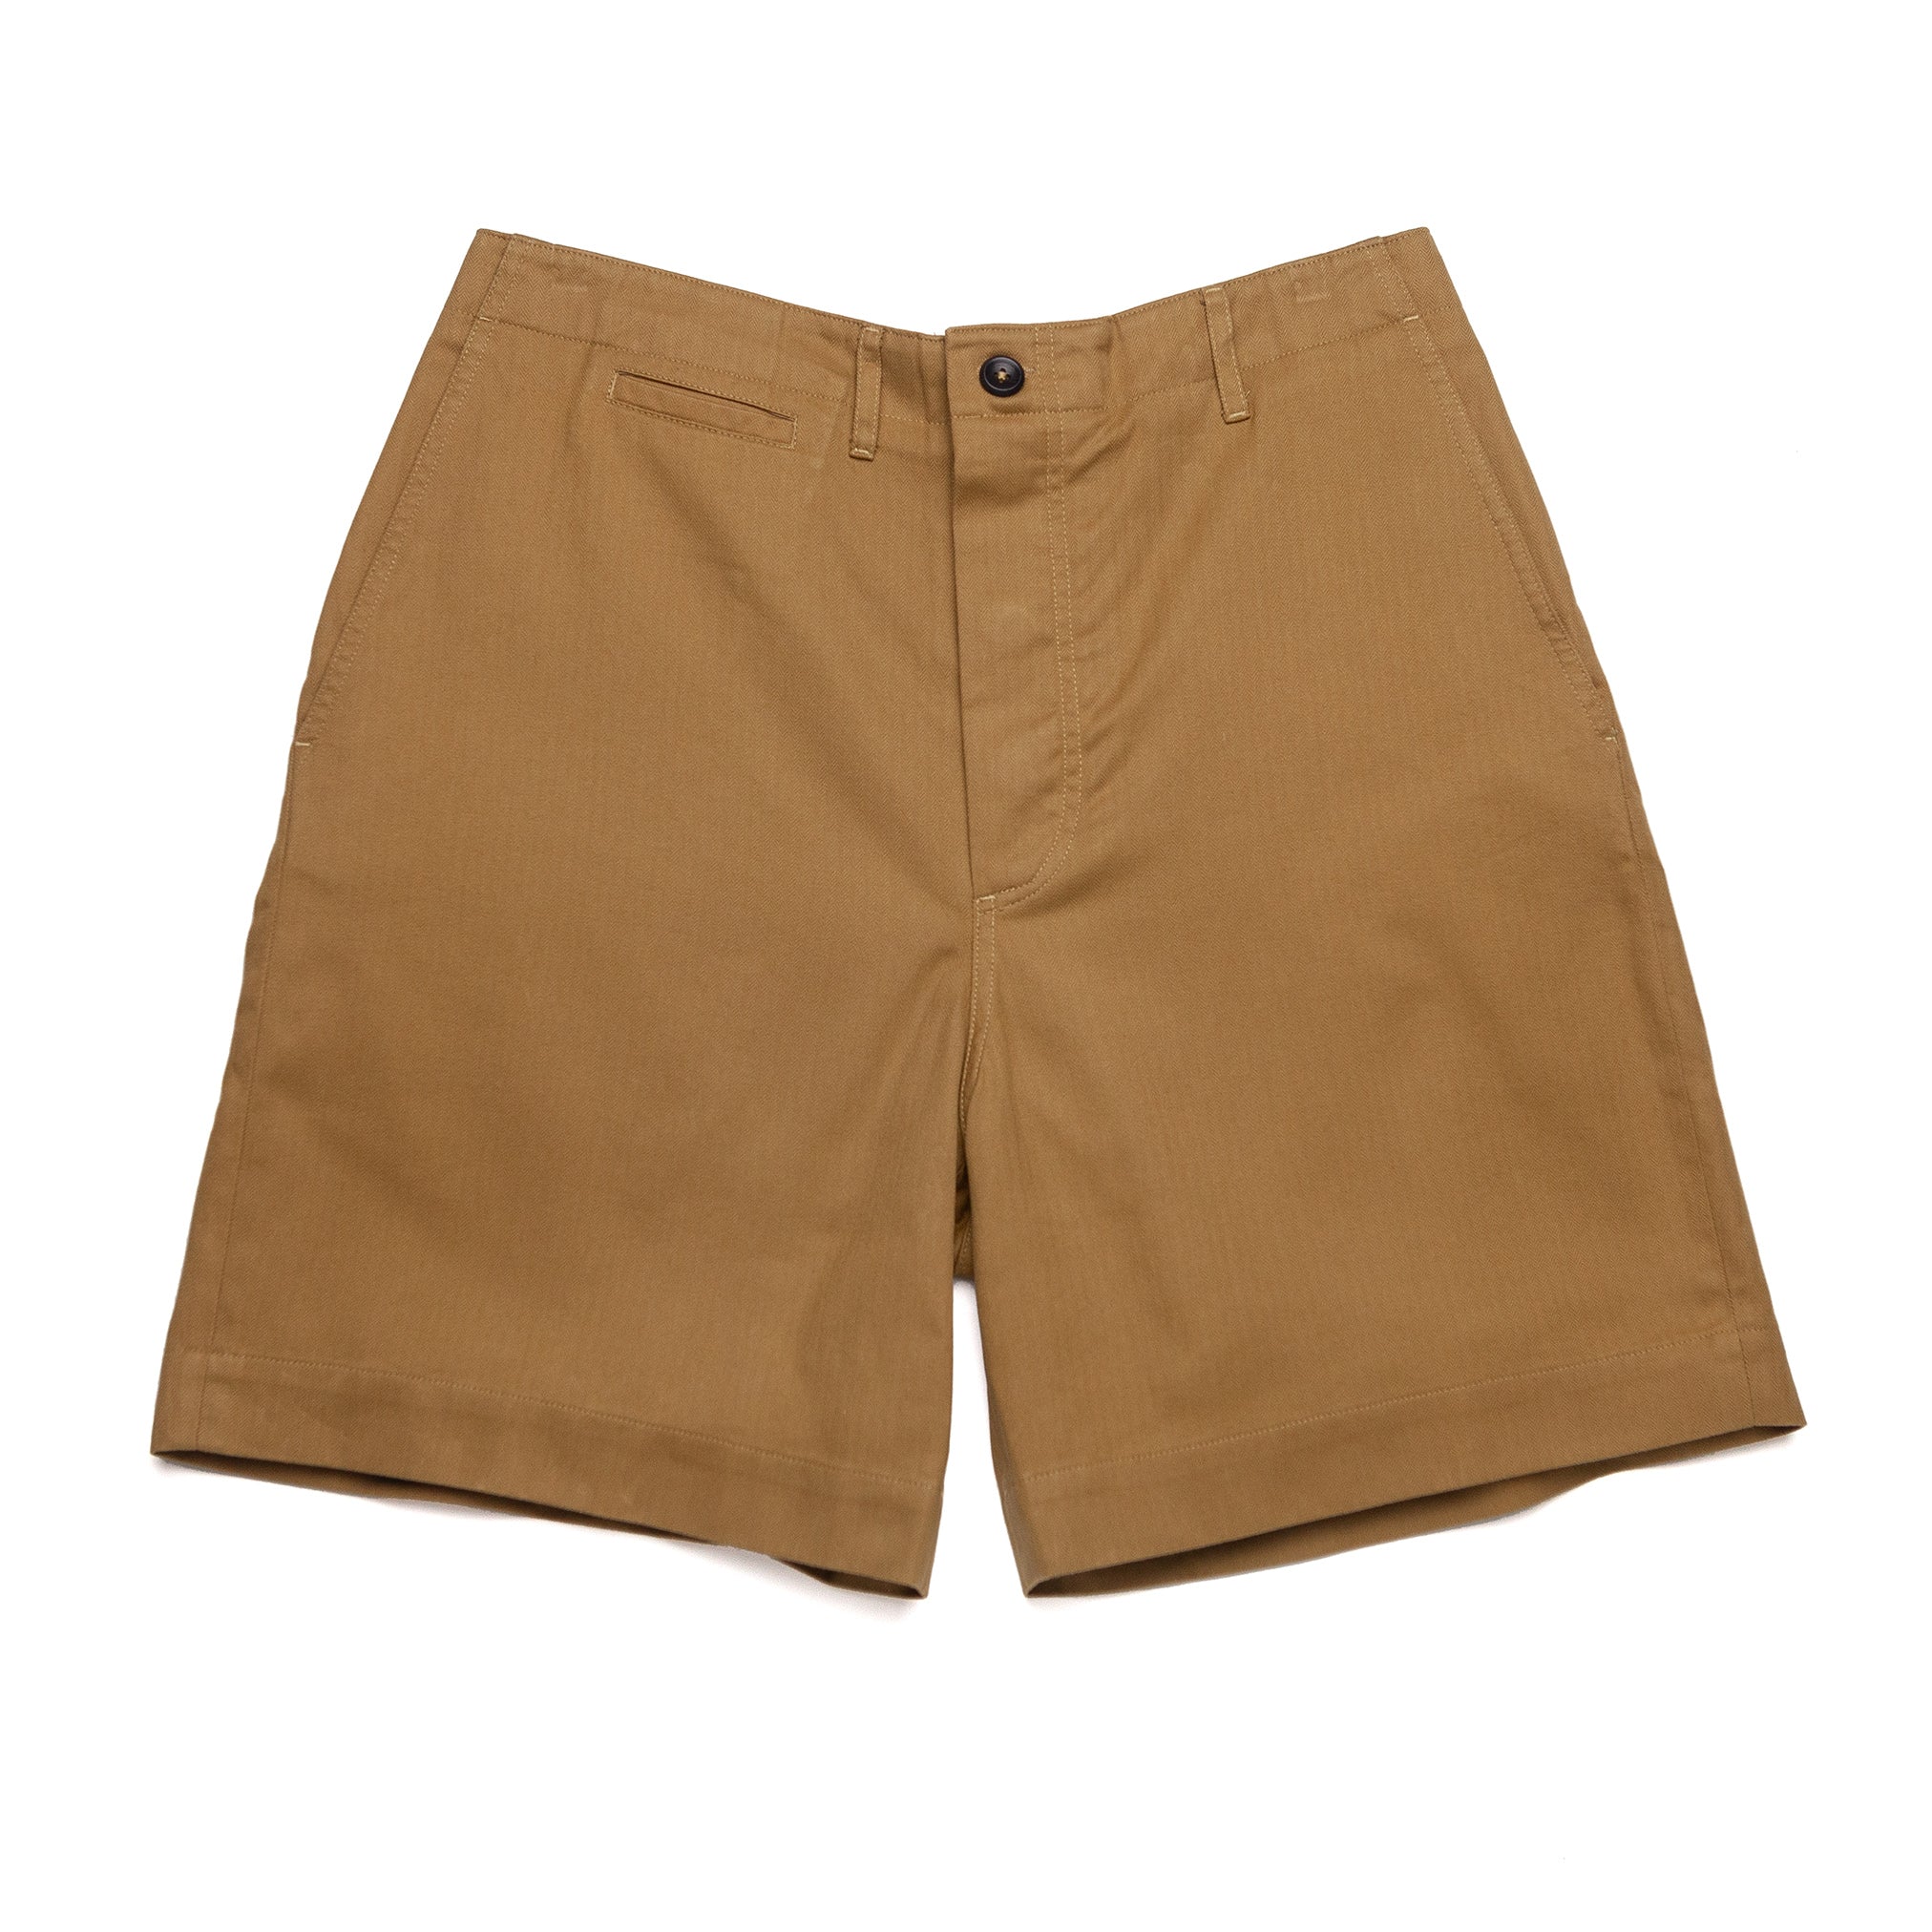 The Chino Short in Camel